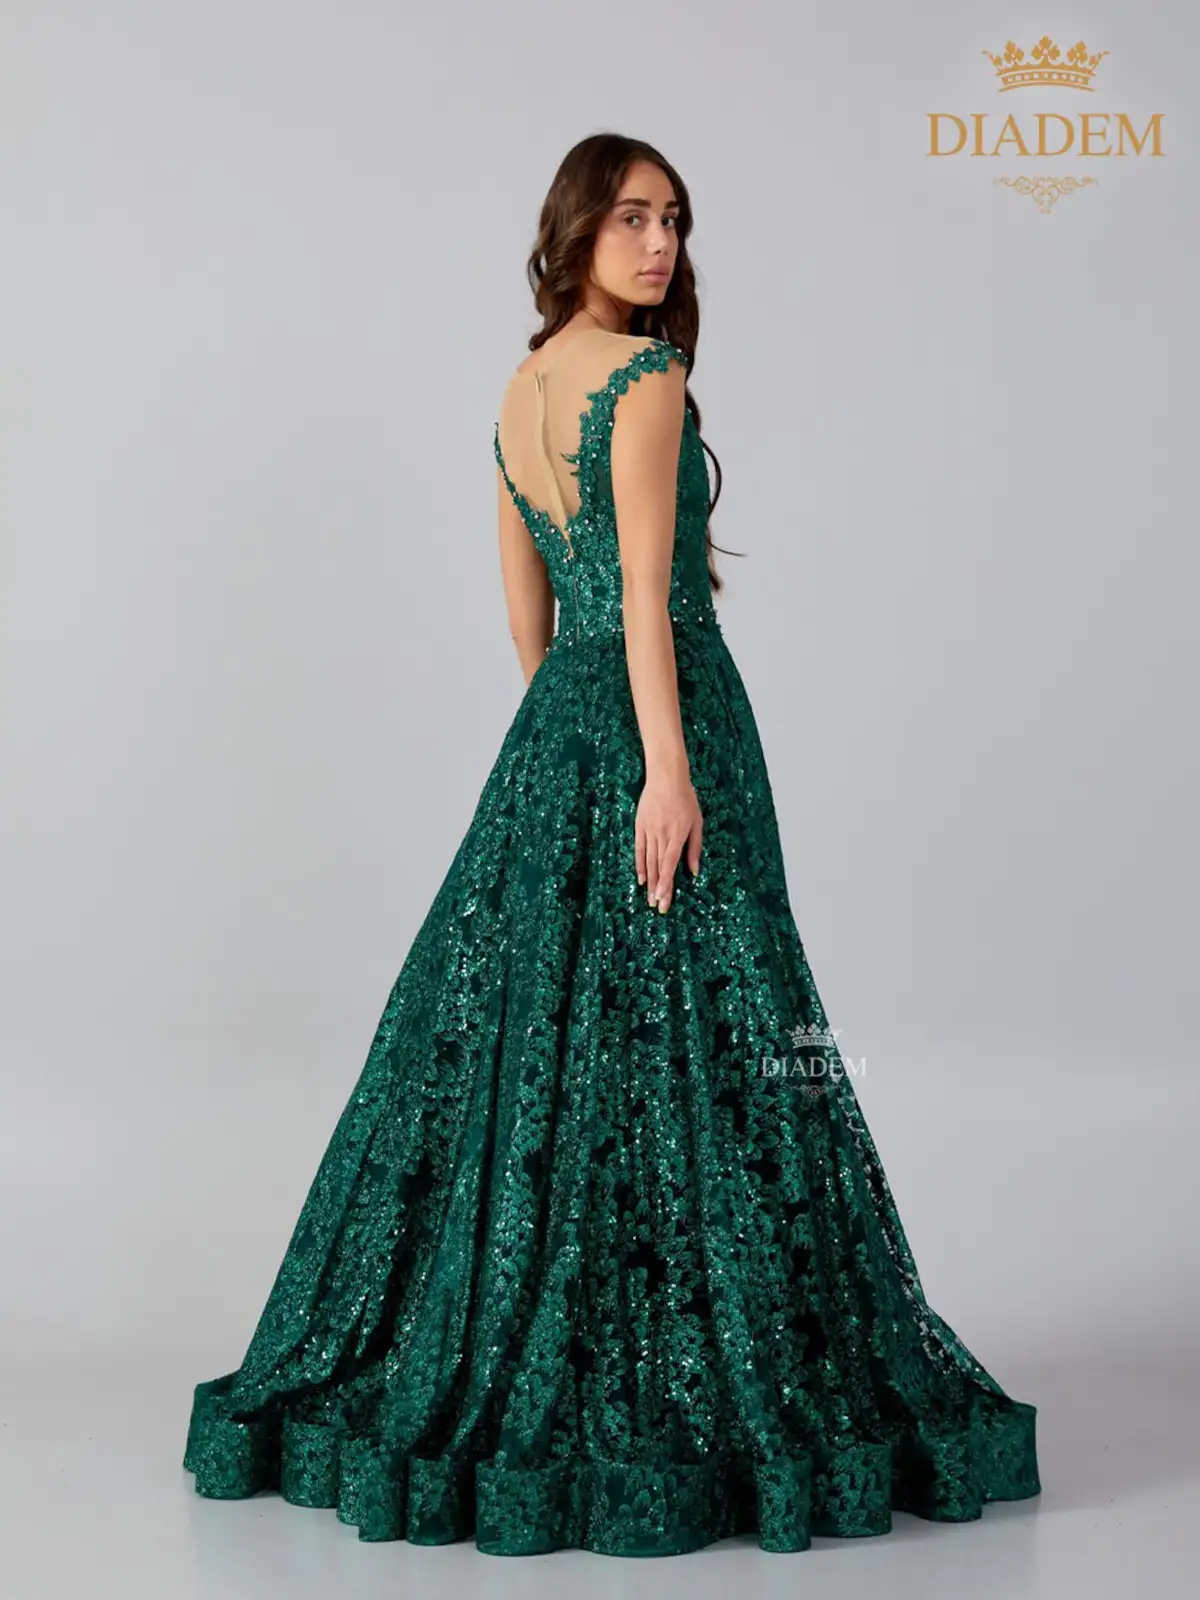 kids bottle green gown | Gowns, Formal dresses long, Green gown